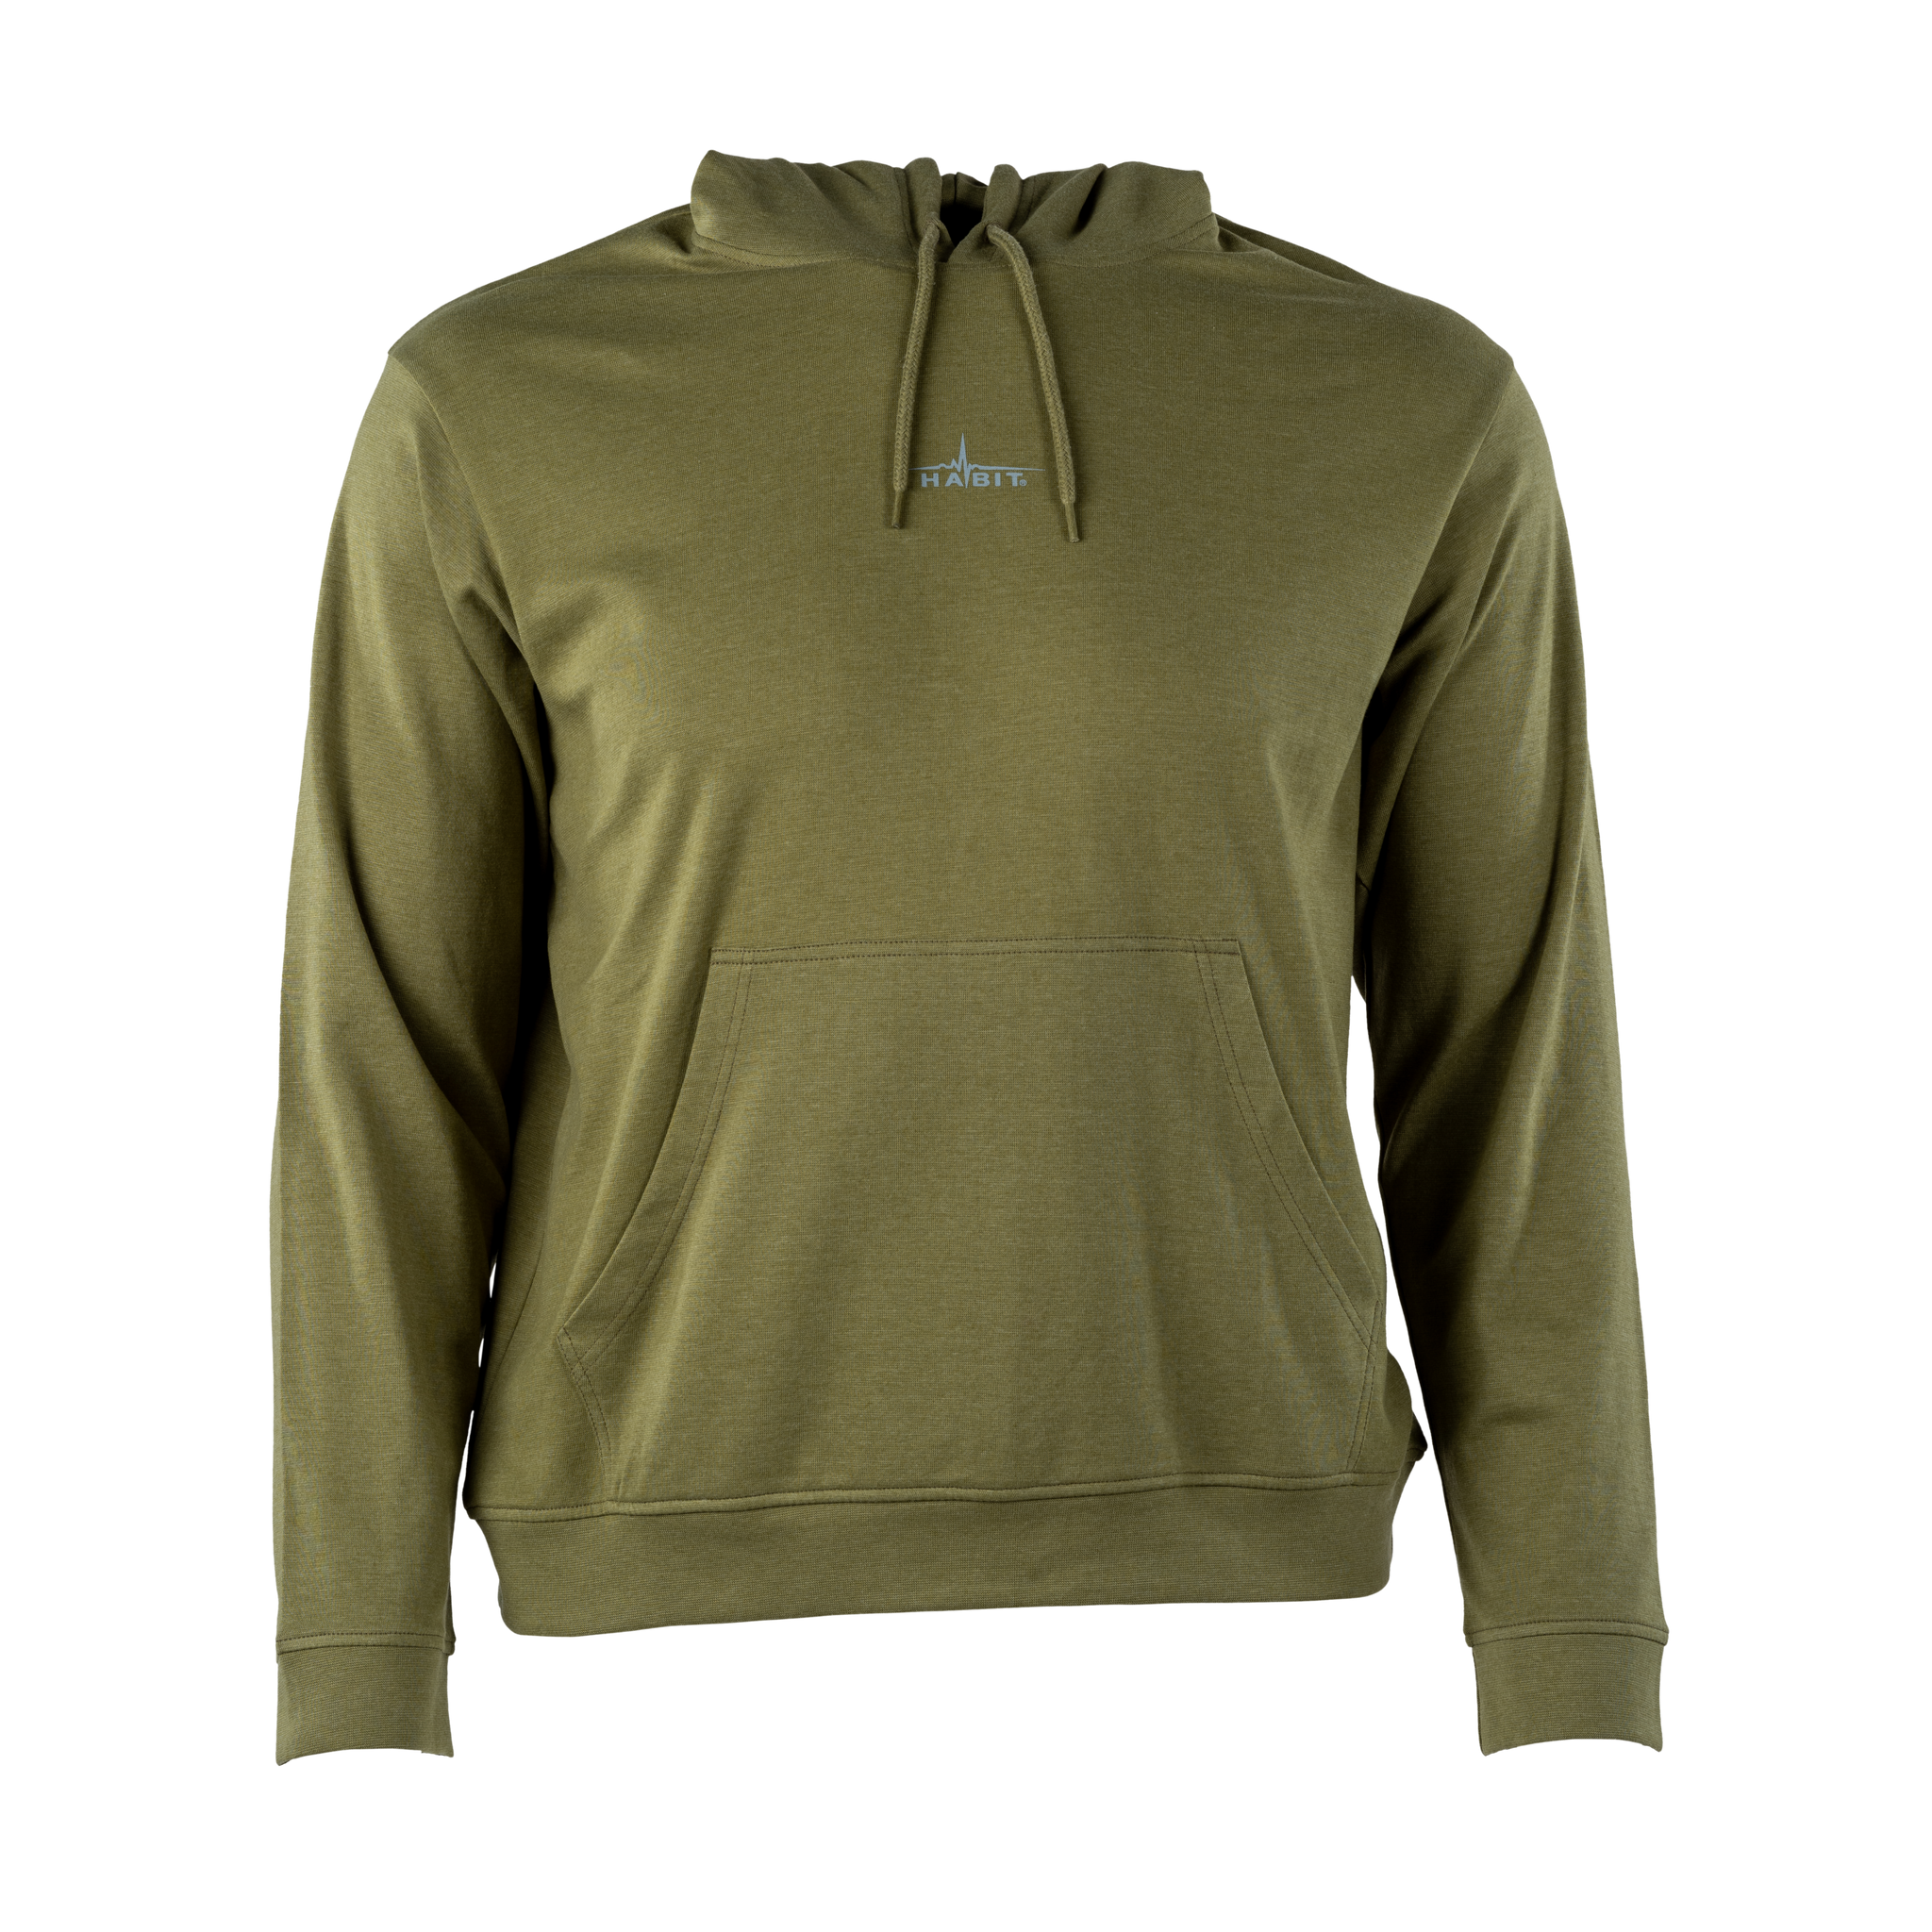 Olive green pullover hoodie